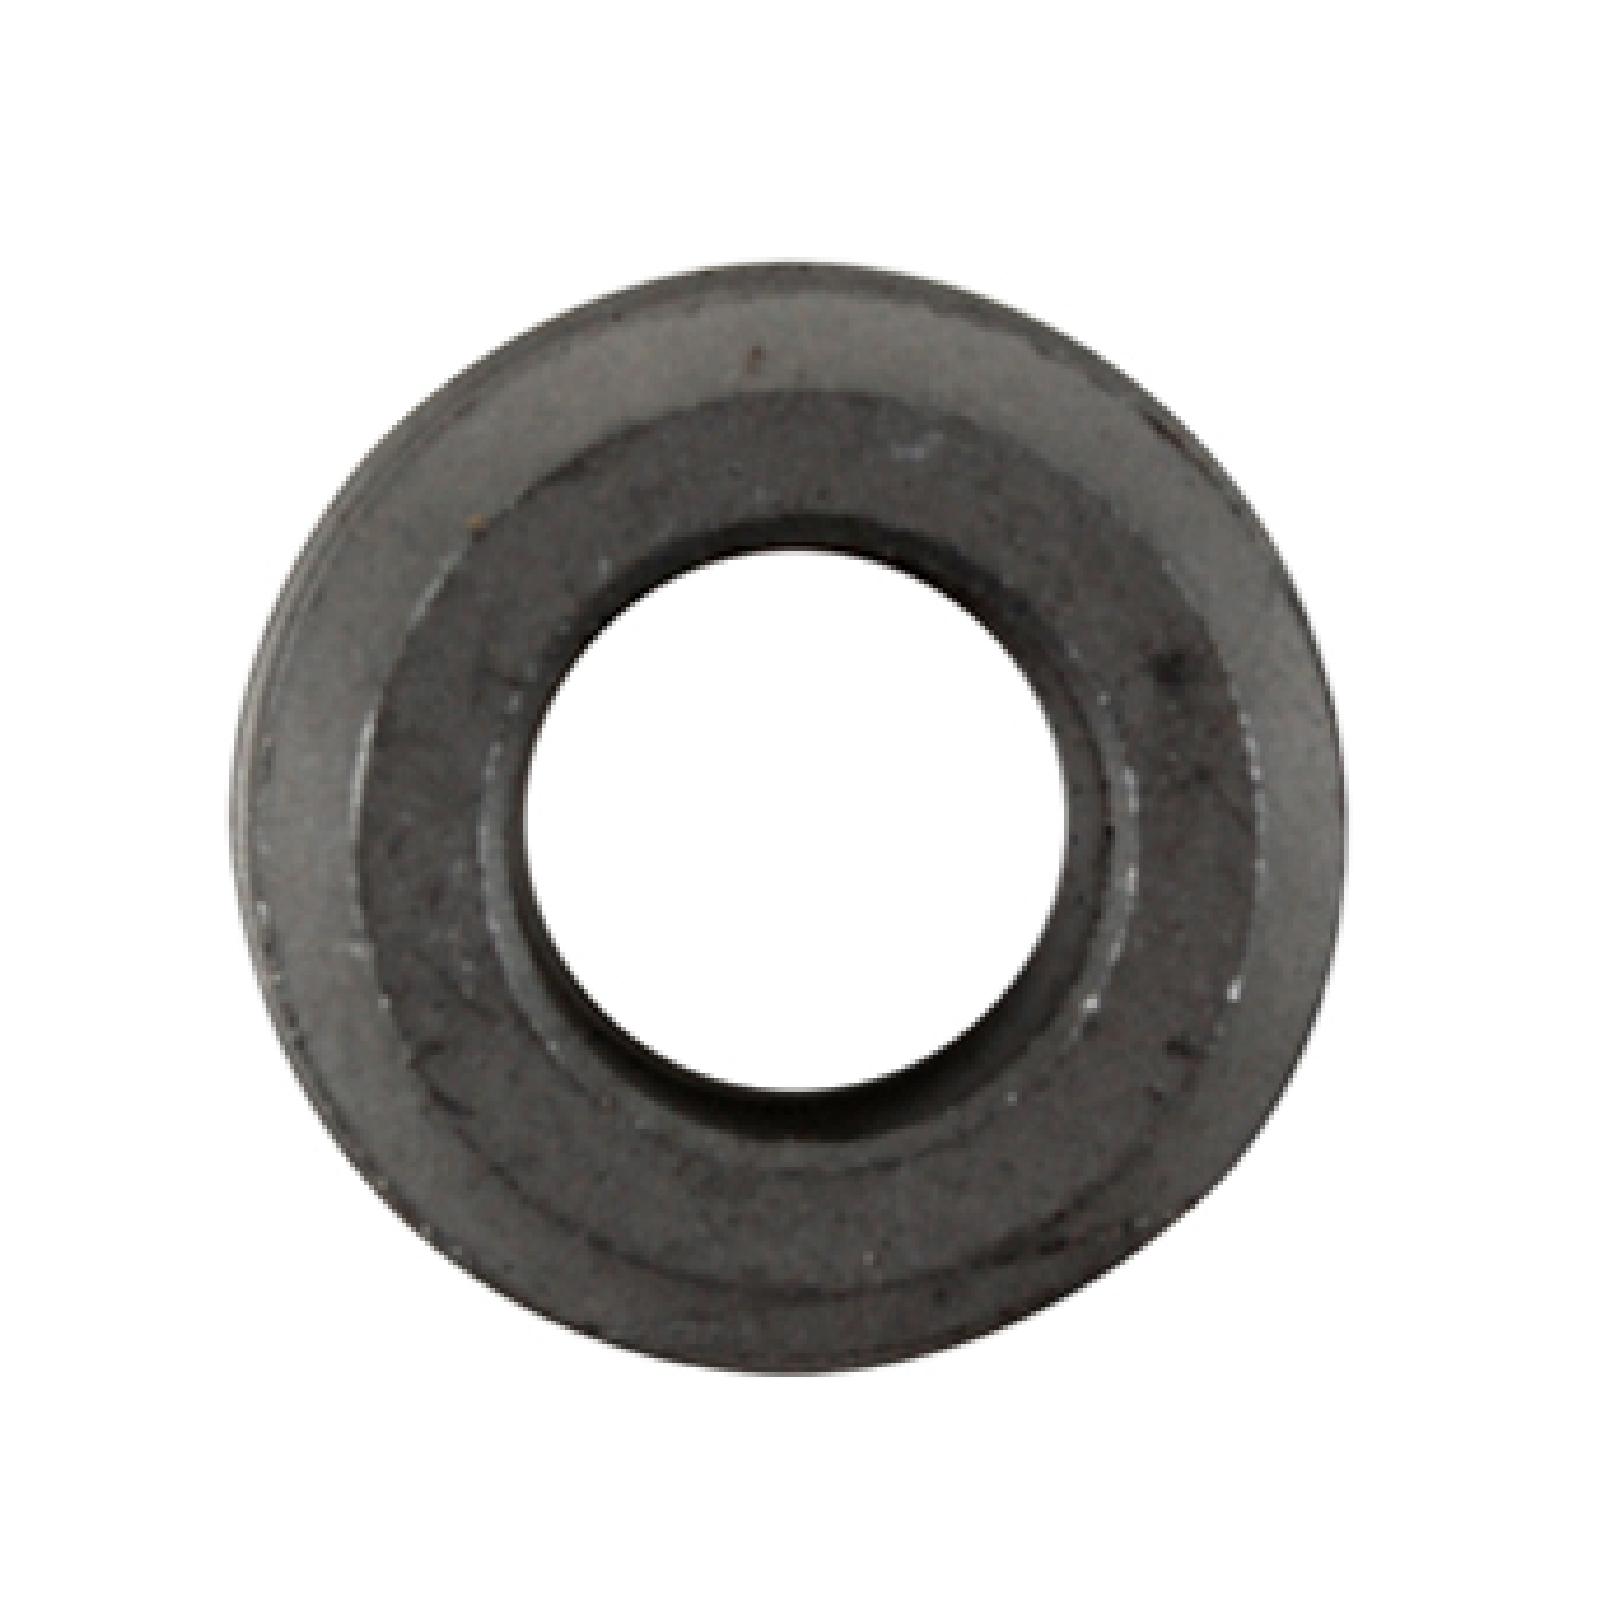 BEARING FLANGE part# 741-3069 by MTD